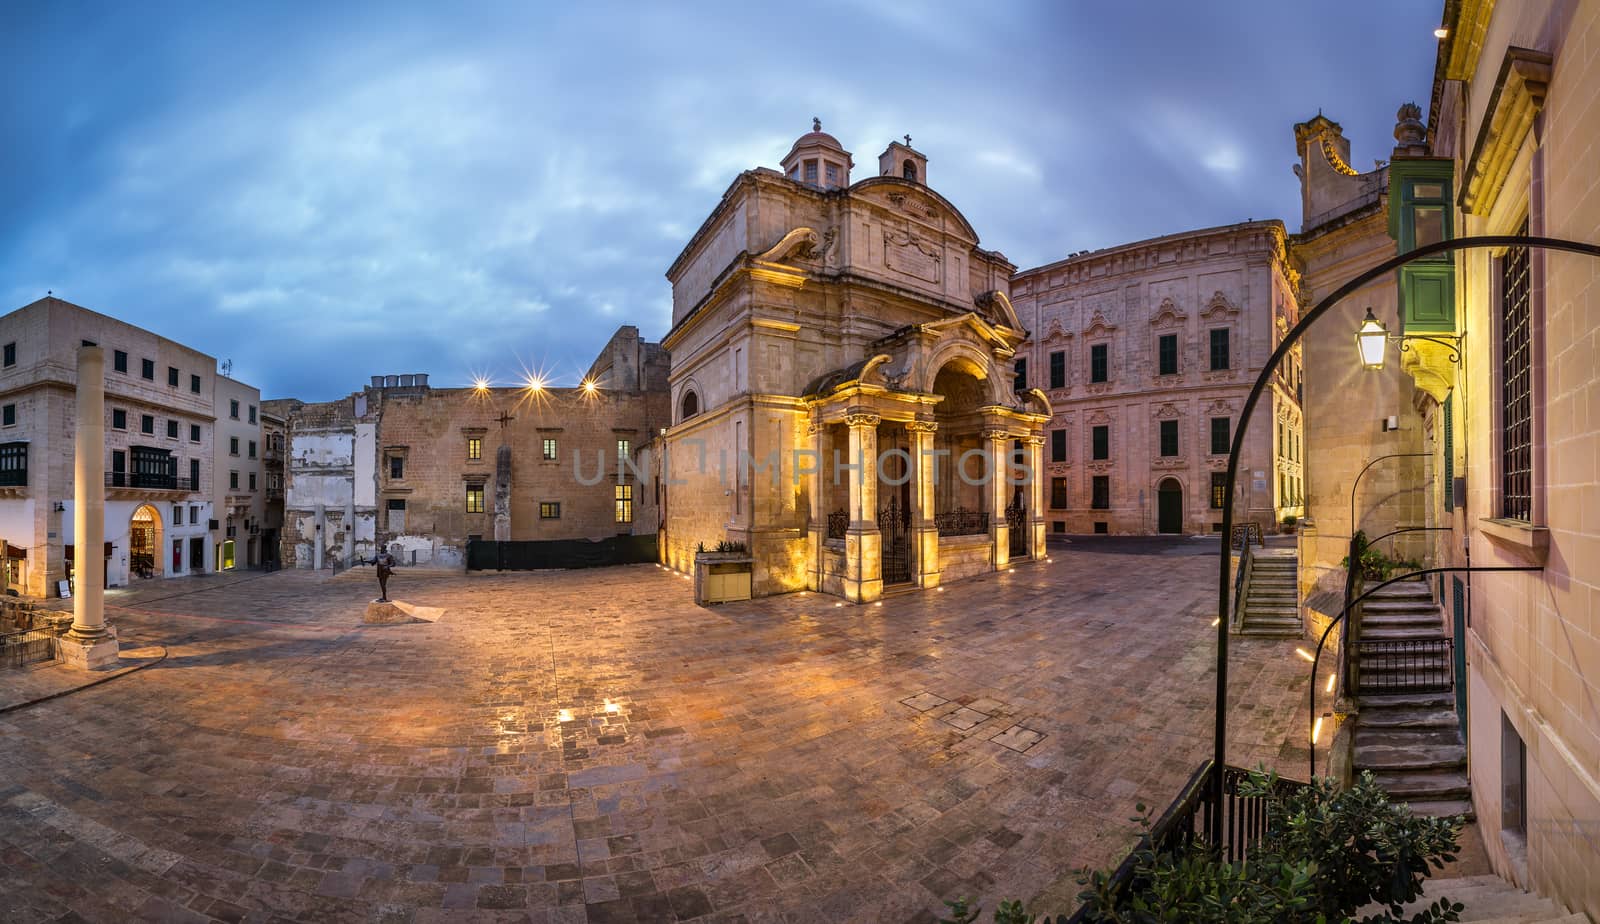 Panorama Saint Catherine of Italy Church and Jean Vallette Pjazza in the Morning, Vallette, Malta